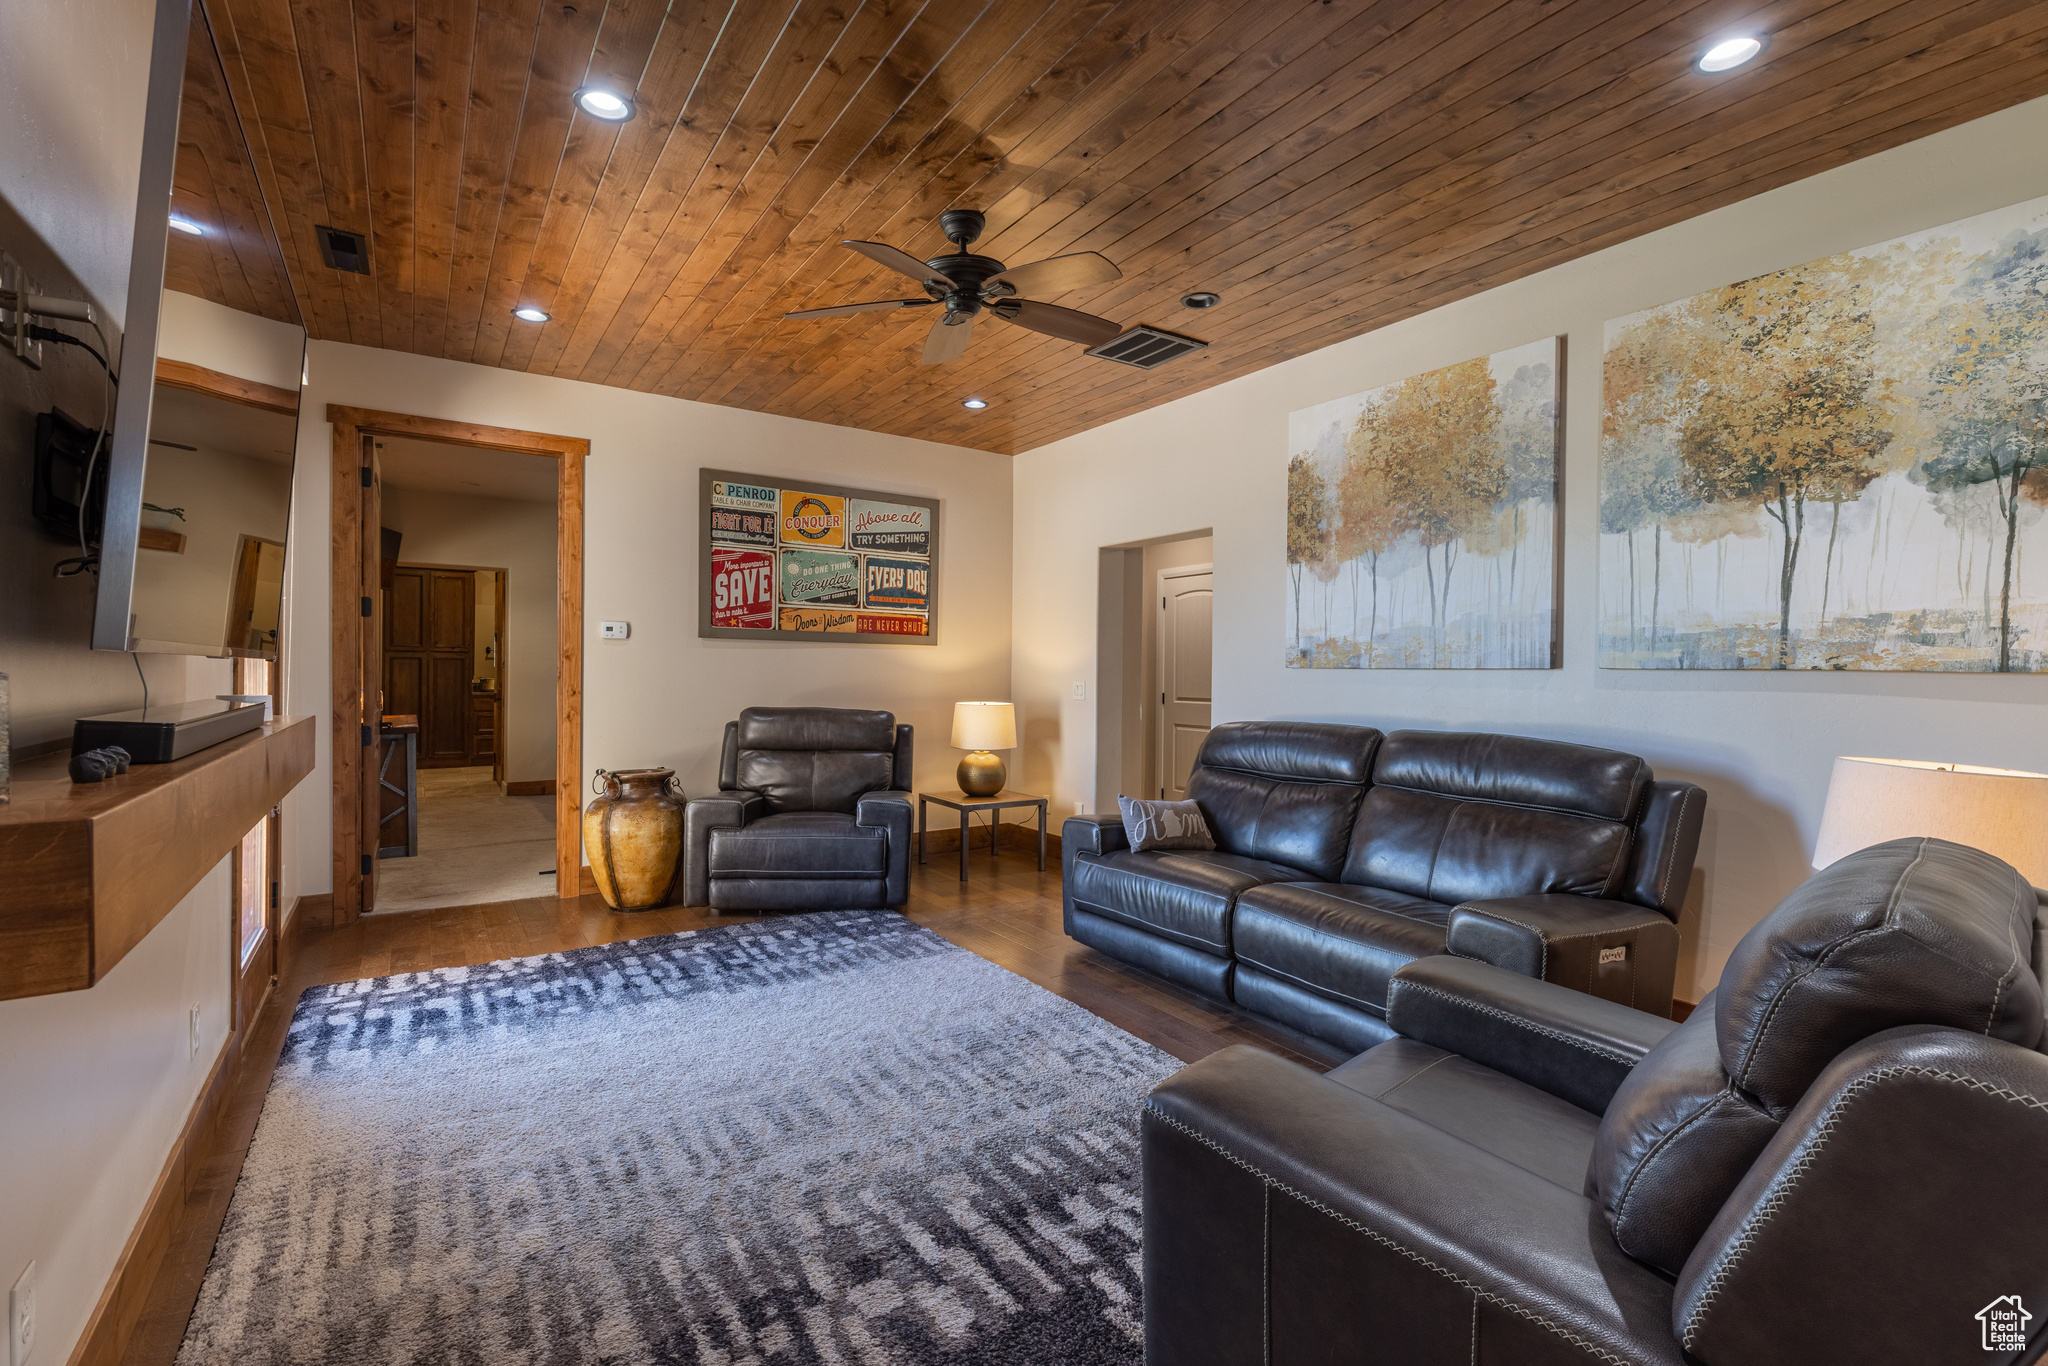 Media room with ceiling fan, dark hardwood / wood-floors, and wooden ceiling accent